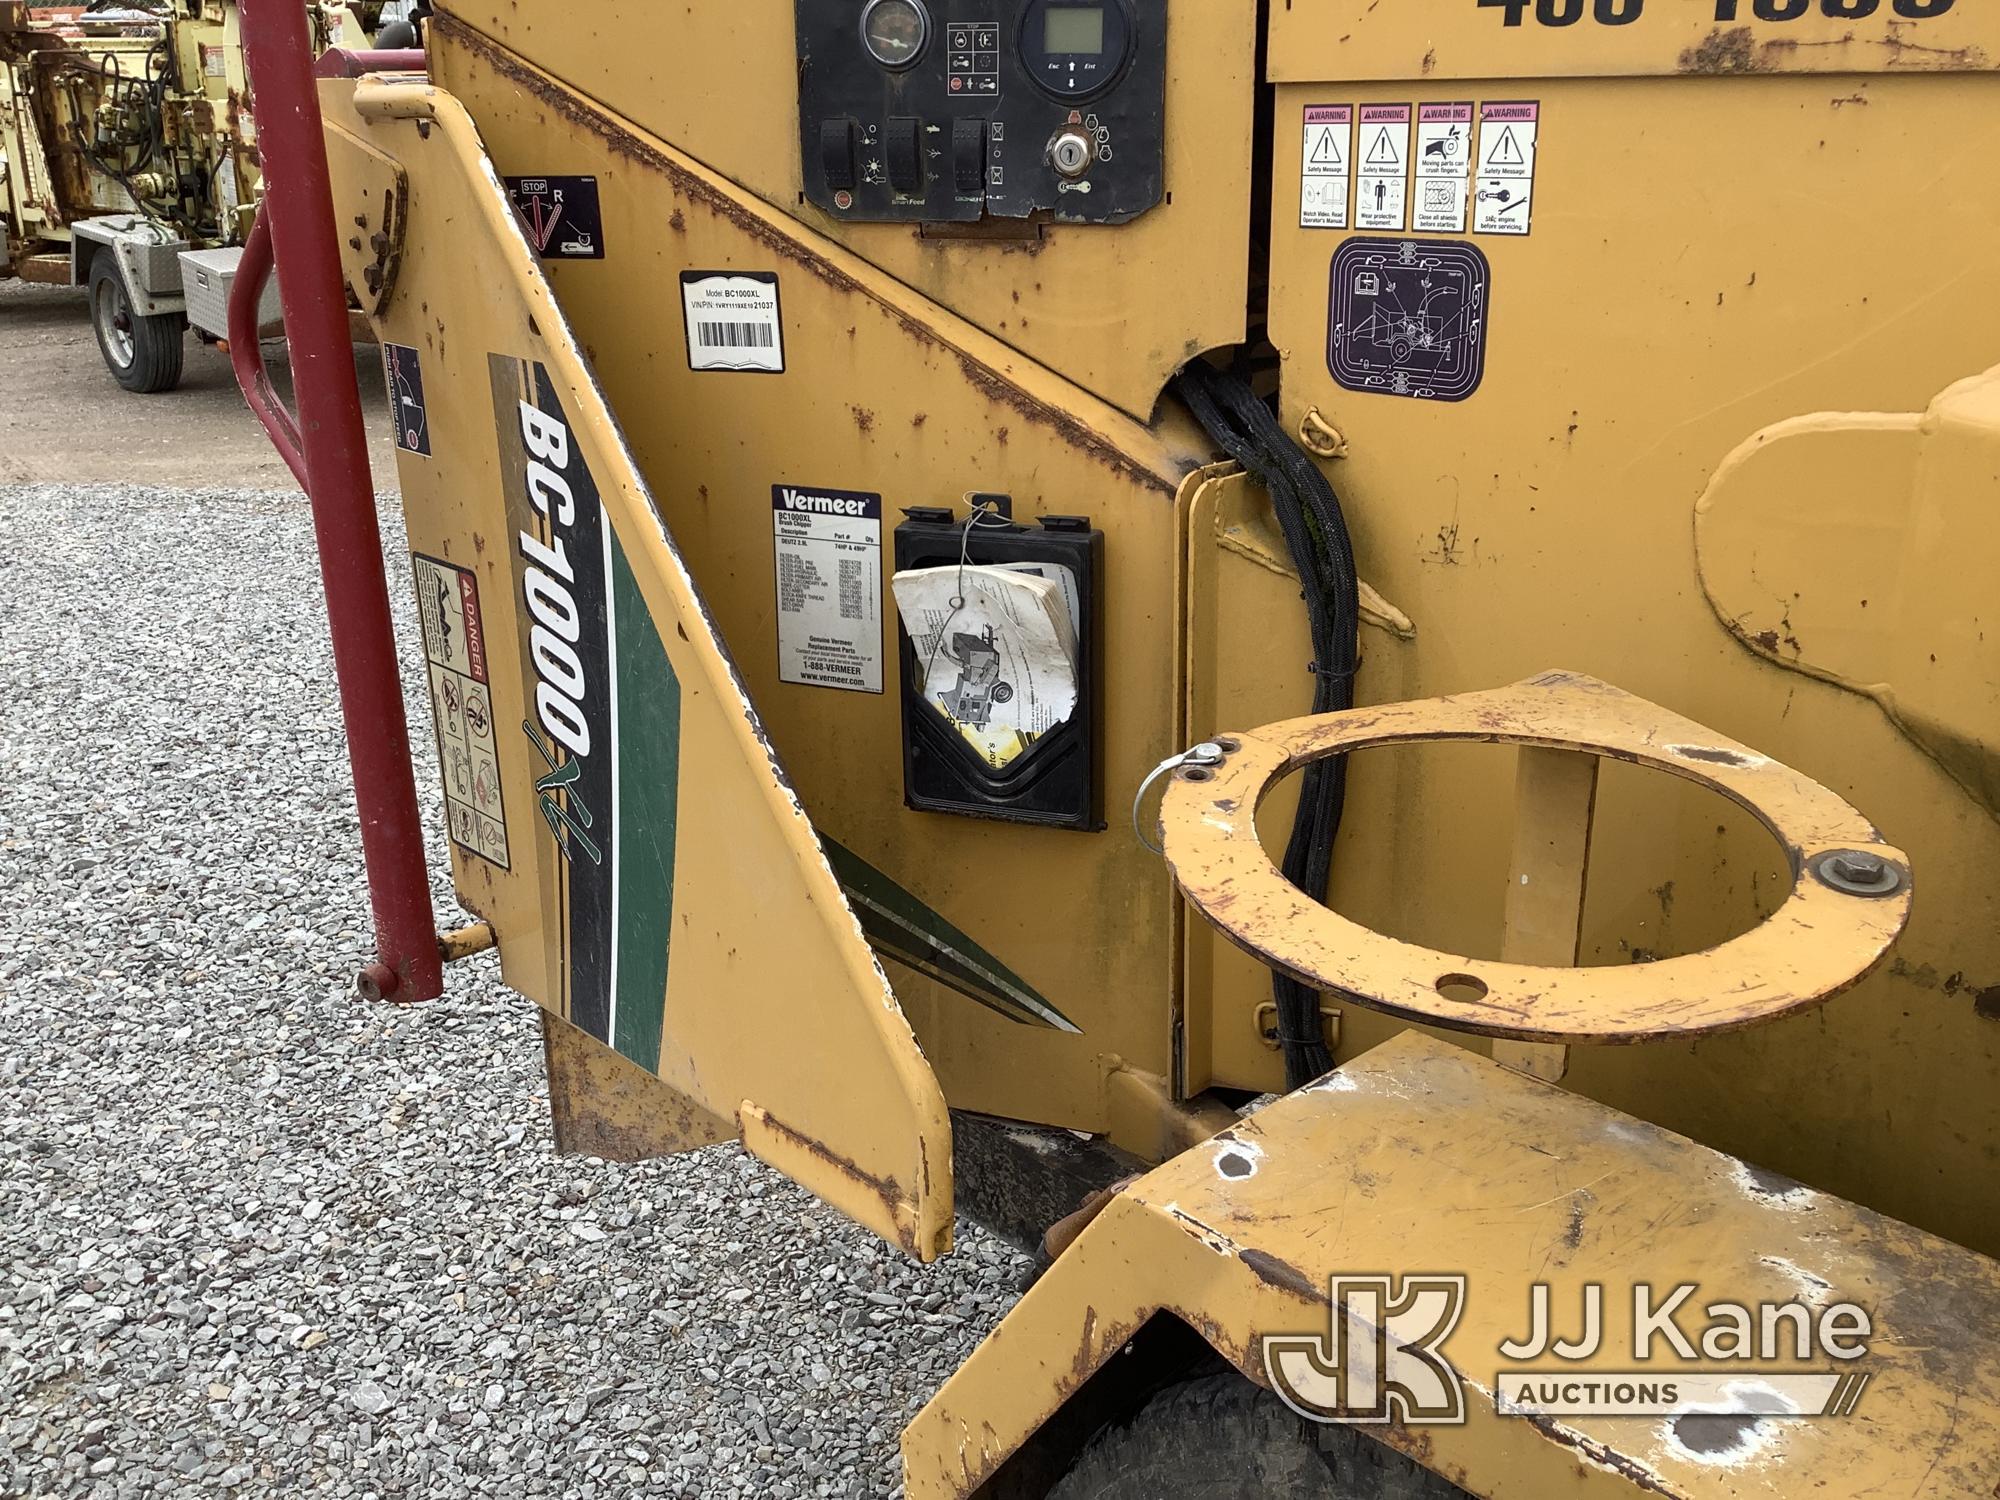 (Smock, PA) 2014 Vermeer BC1000XL Chipper (12in Drum) Runs Rough, Operational Condition Unknown, War